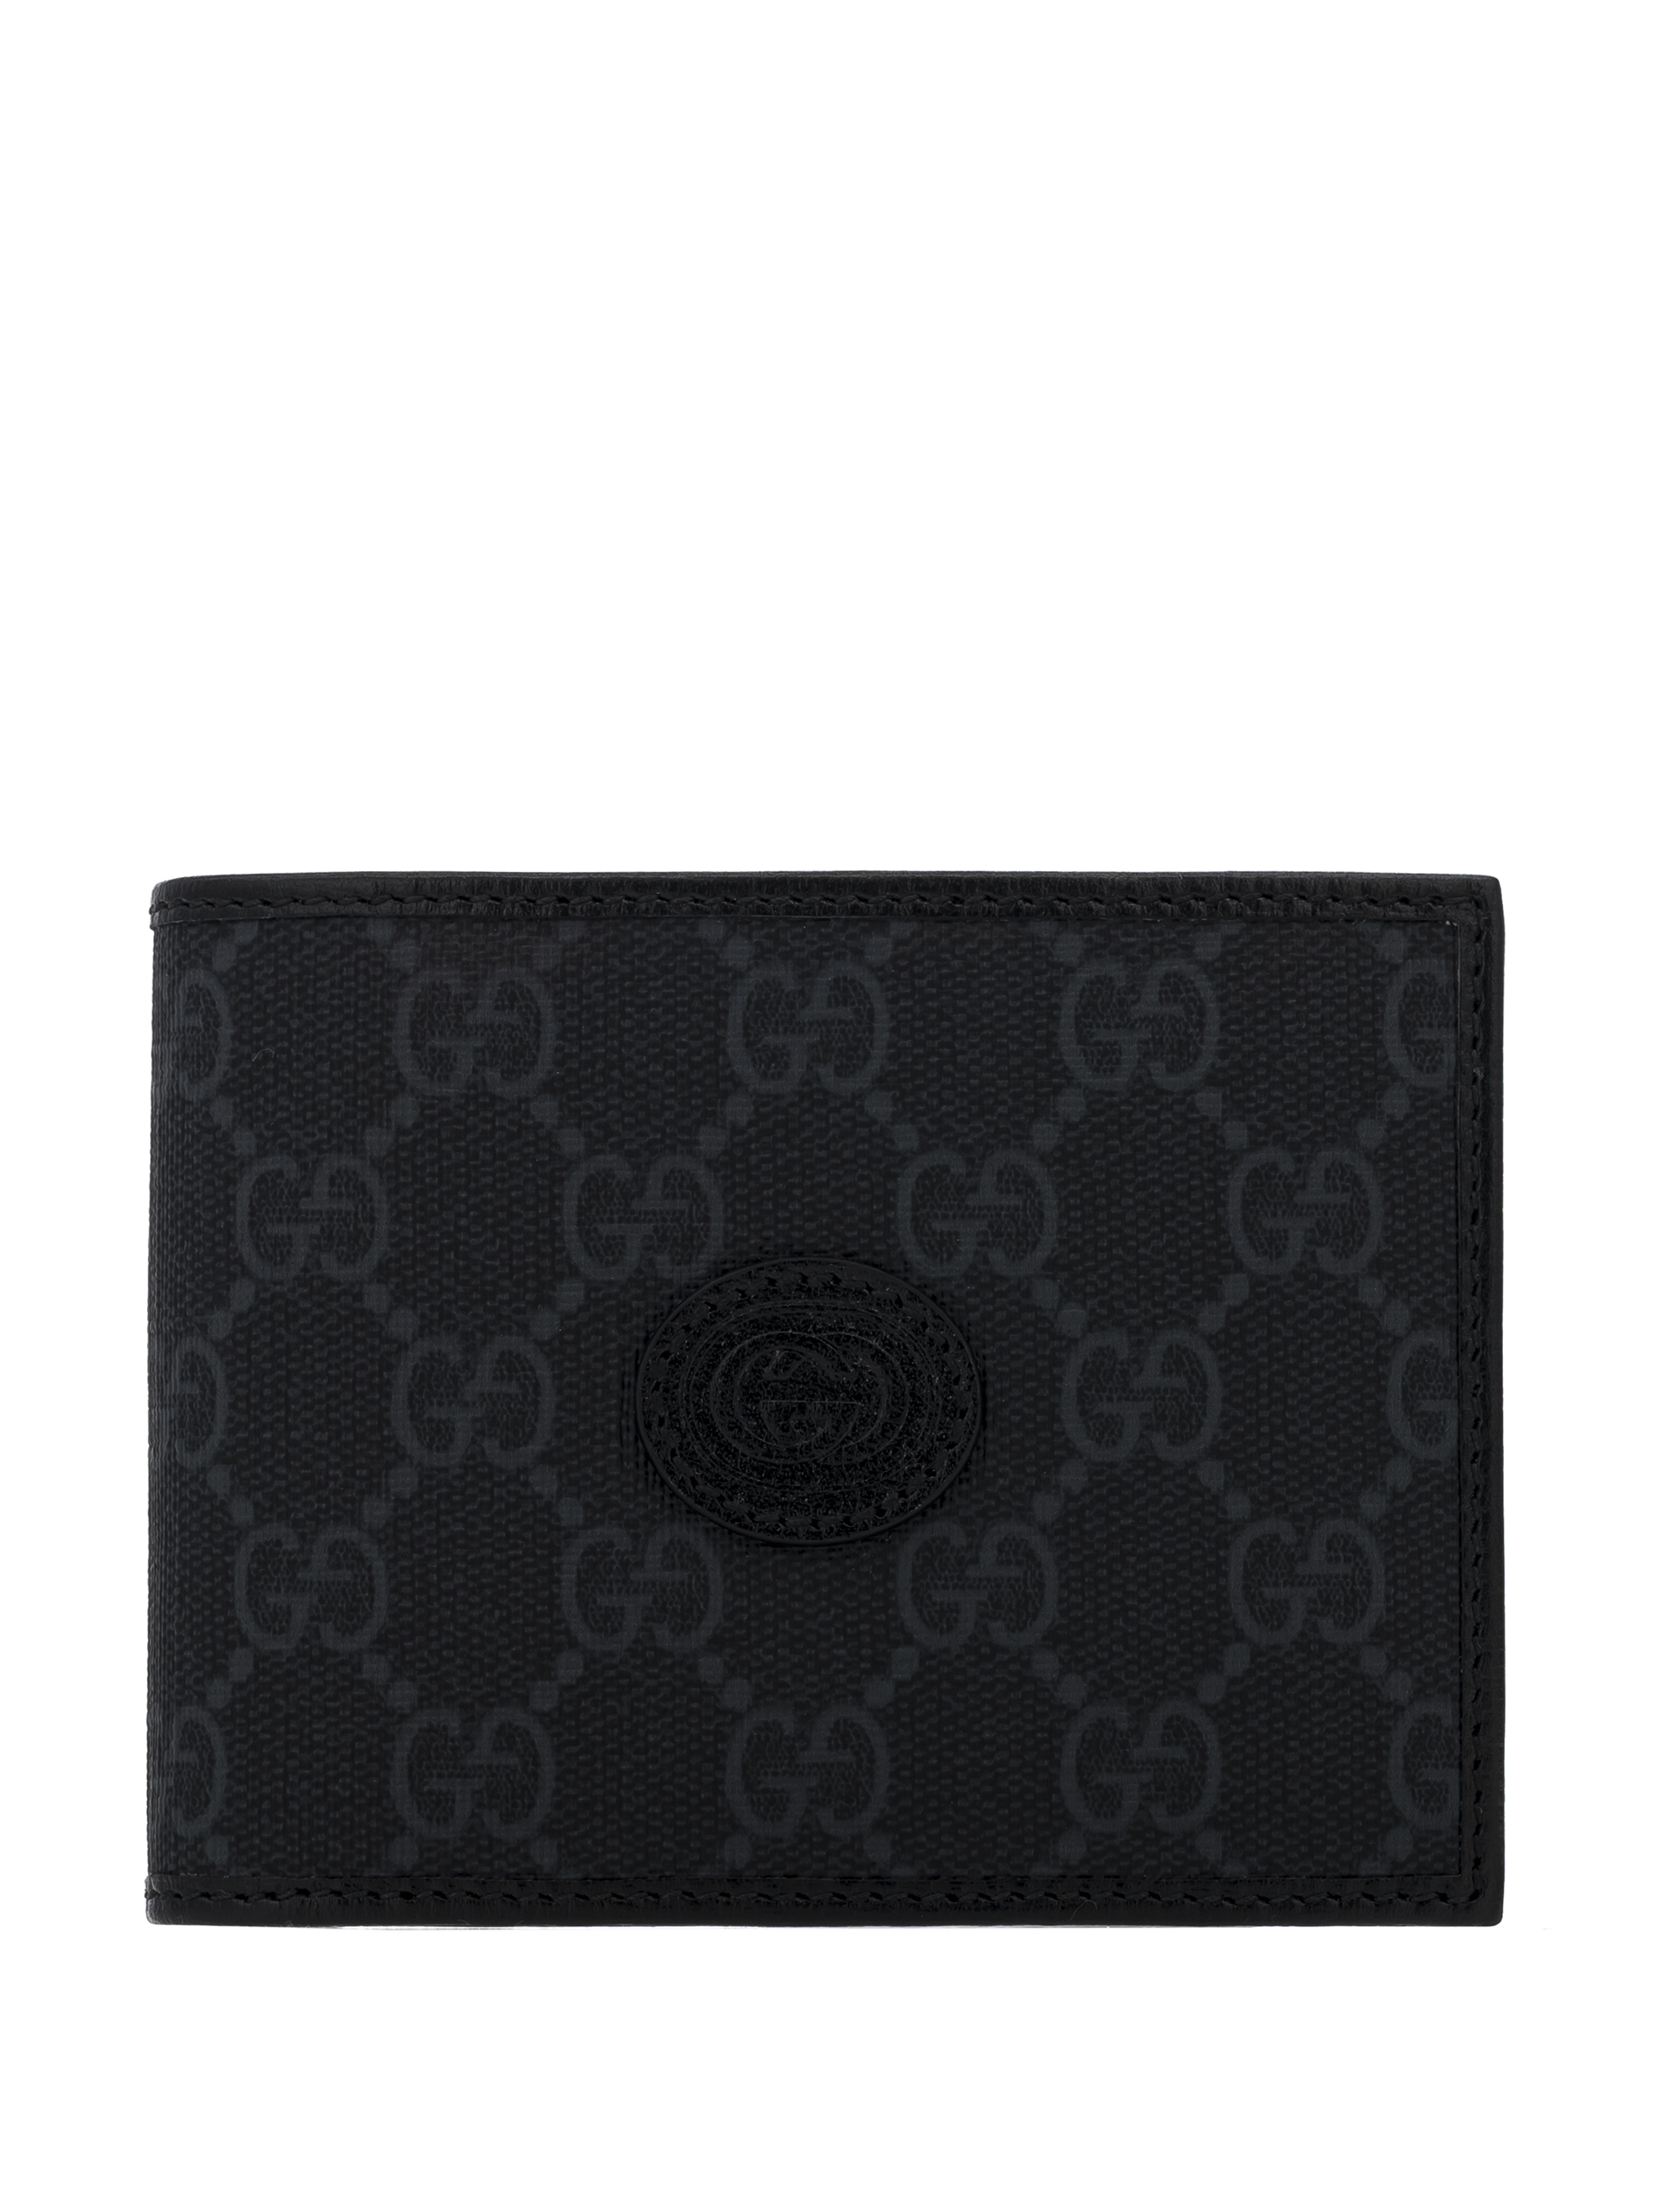 Gucci men's GG Supreme logo wallet - buy for 288000 KZT in the